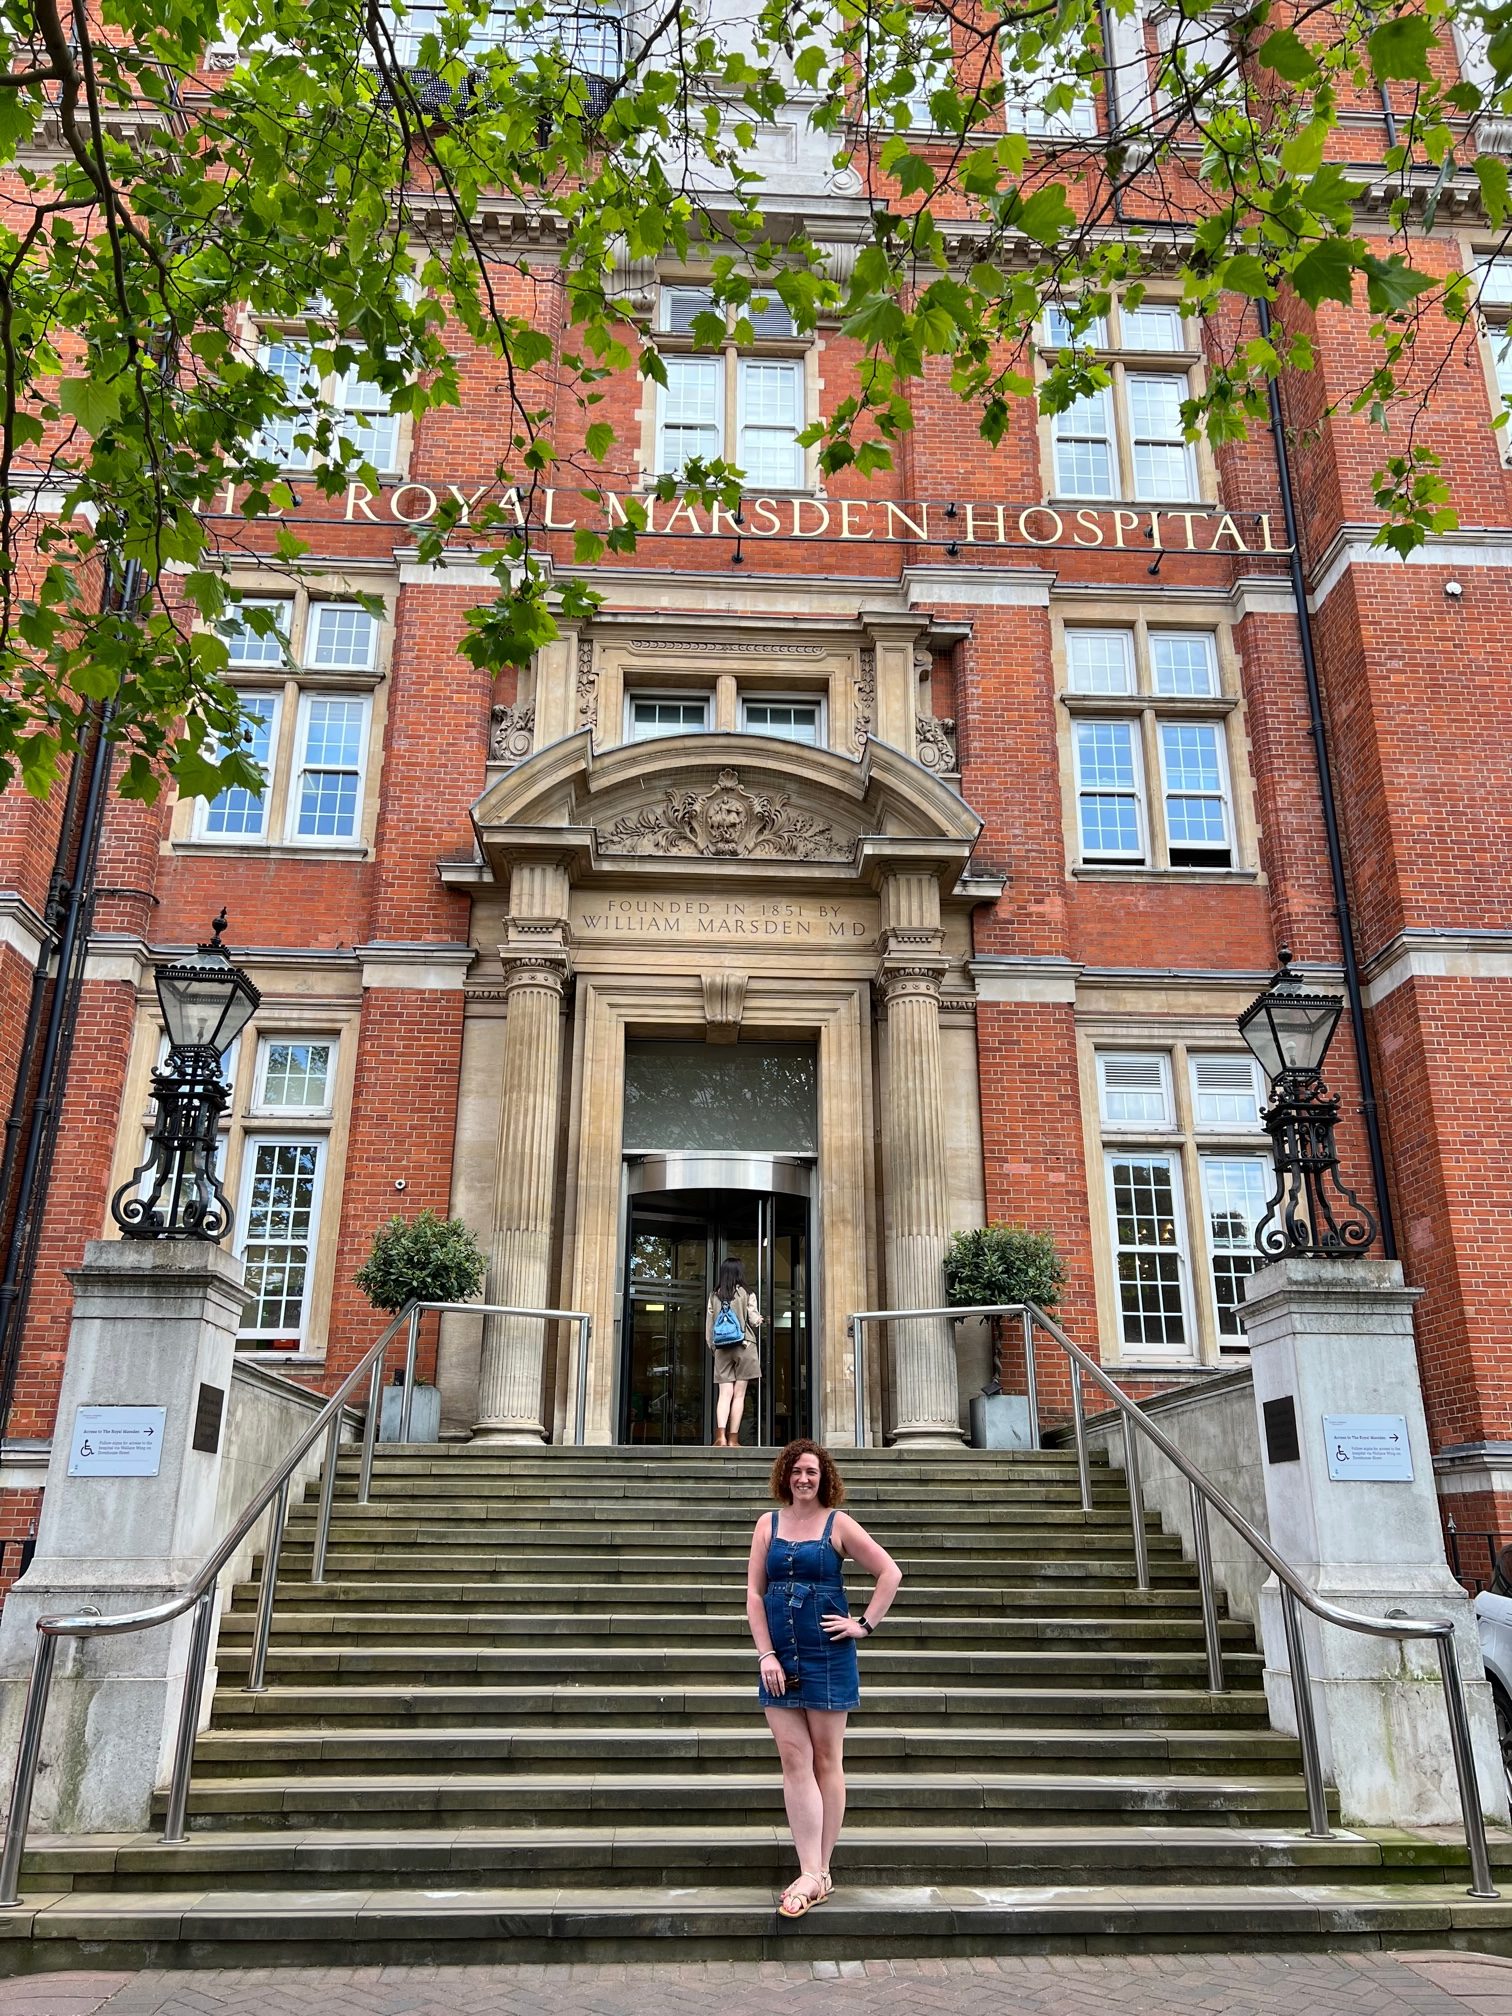 Woman in short denim dress poses on the steps outside the main entrance to the Royal Marsden hospital, Chelsea